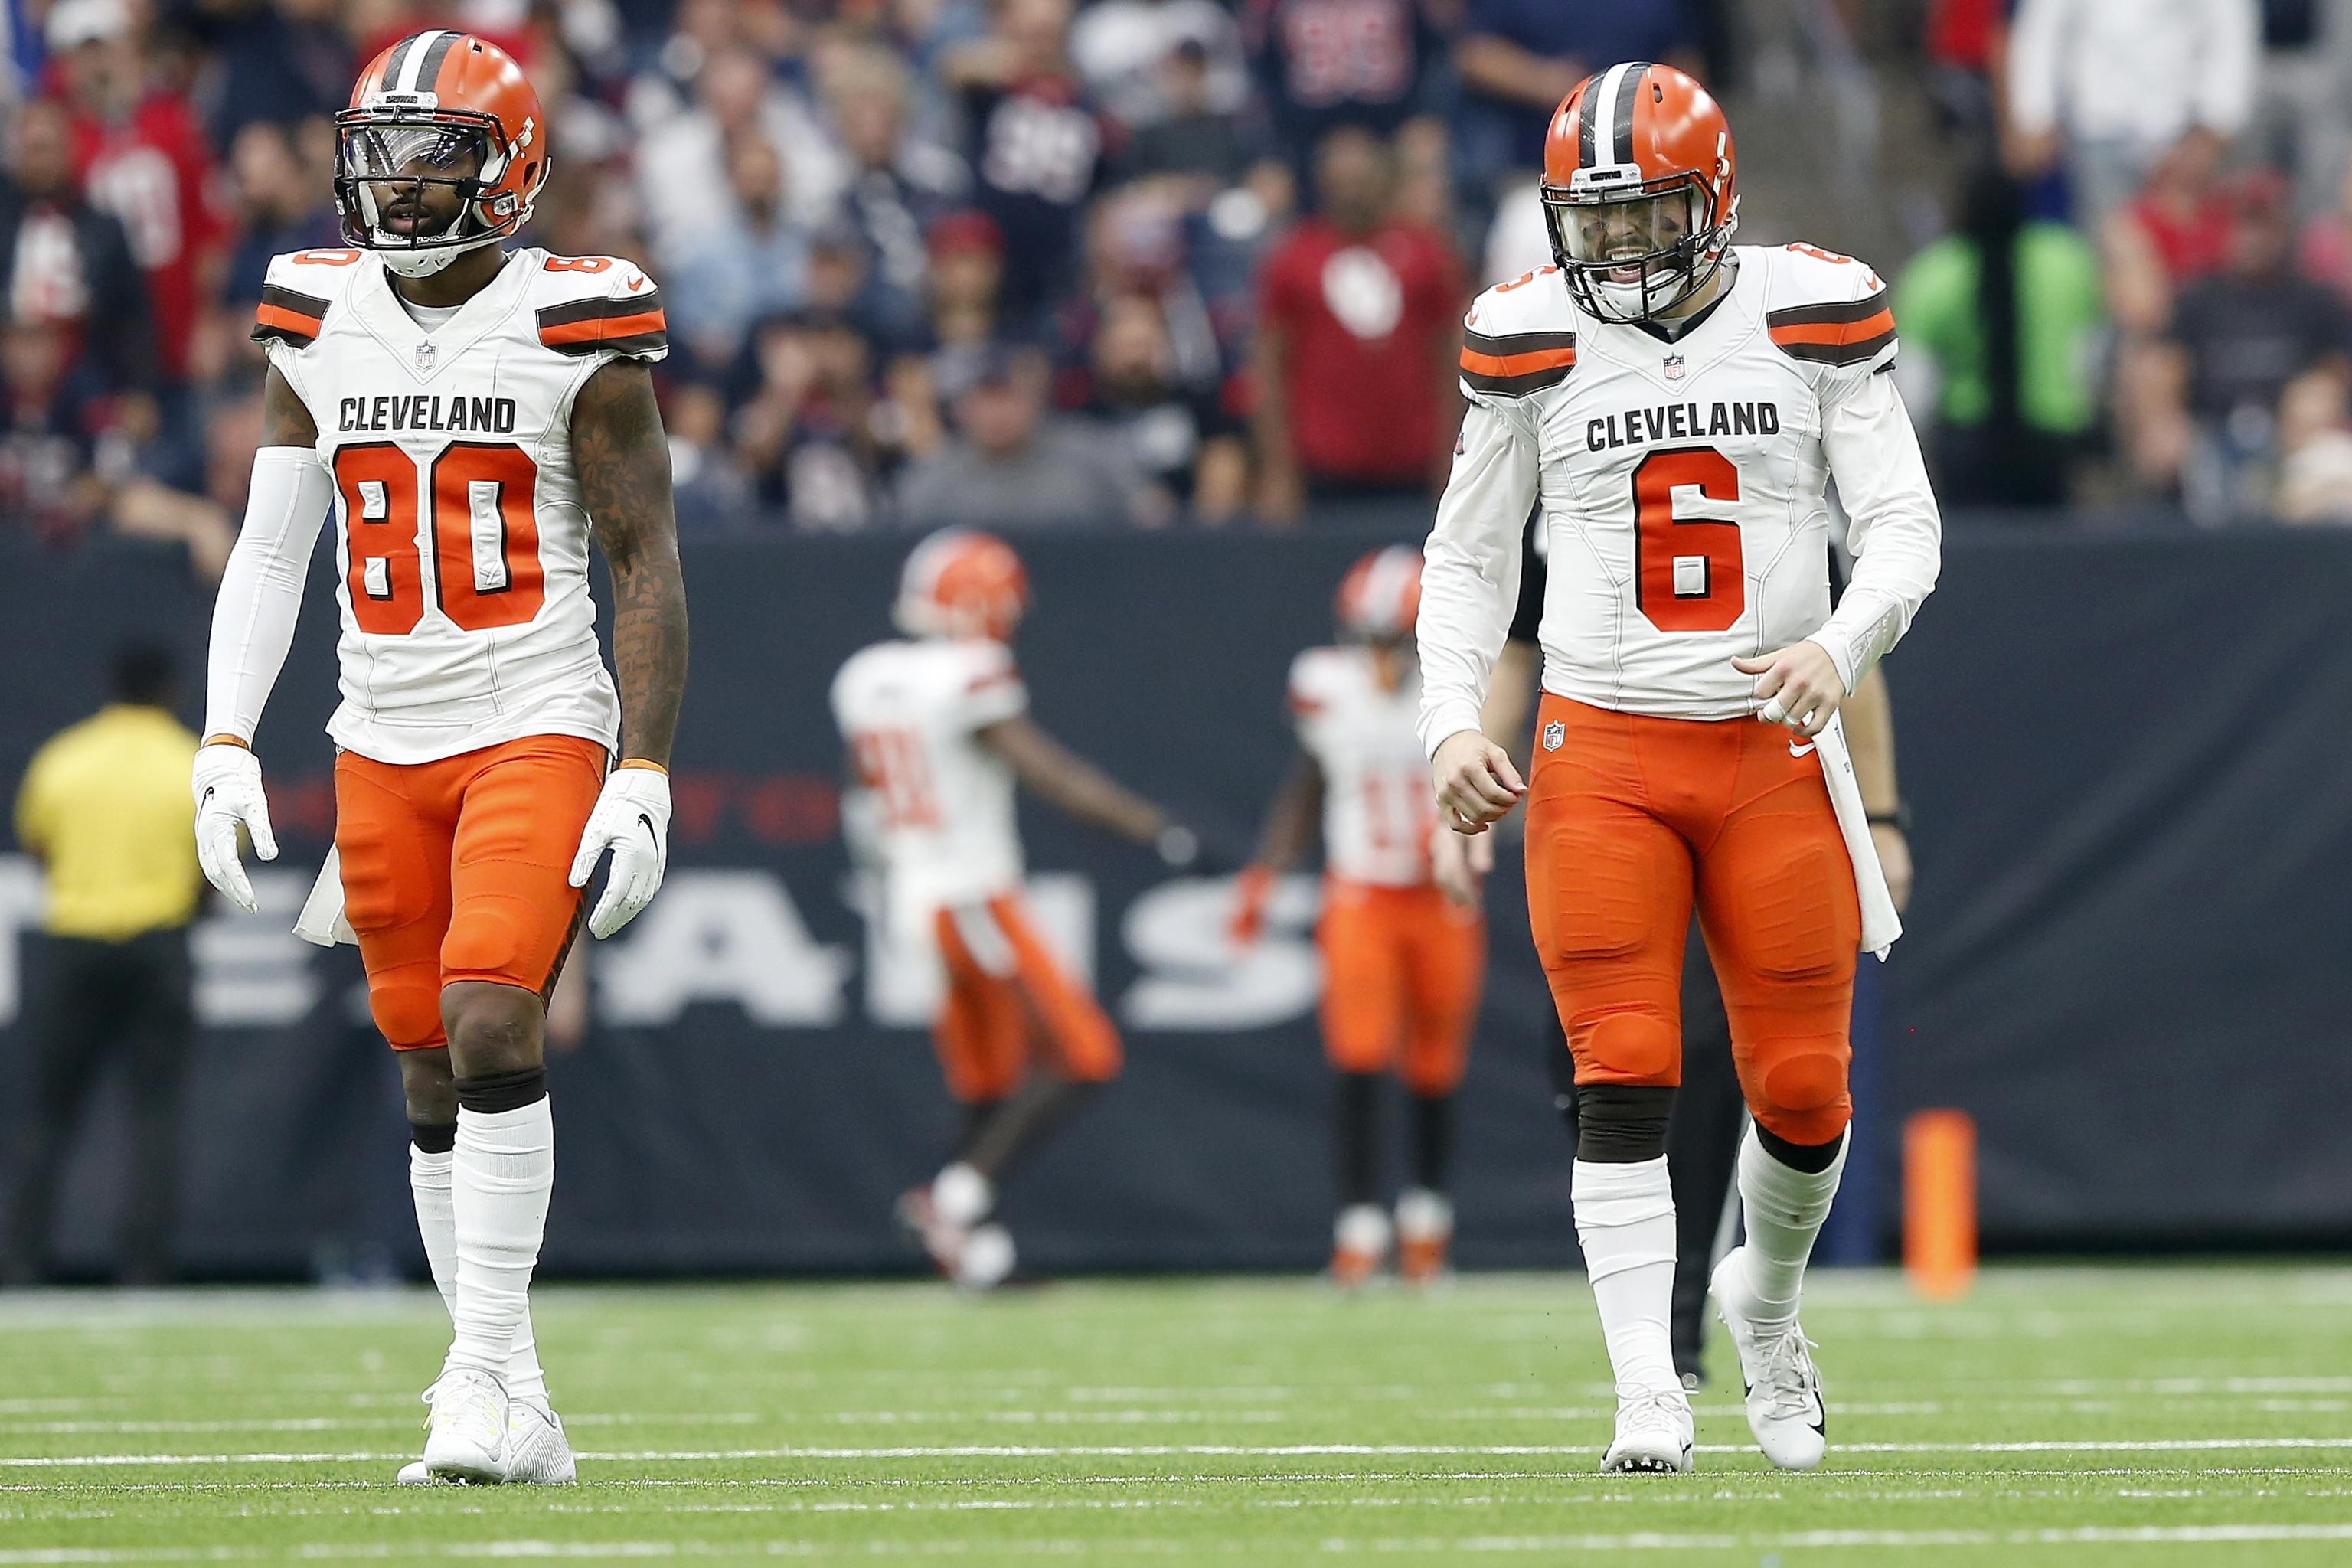 Browns Schedule / Game logs for the cleveland browns, including